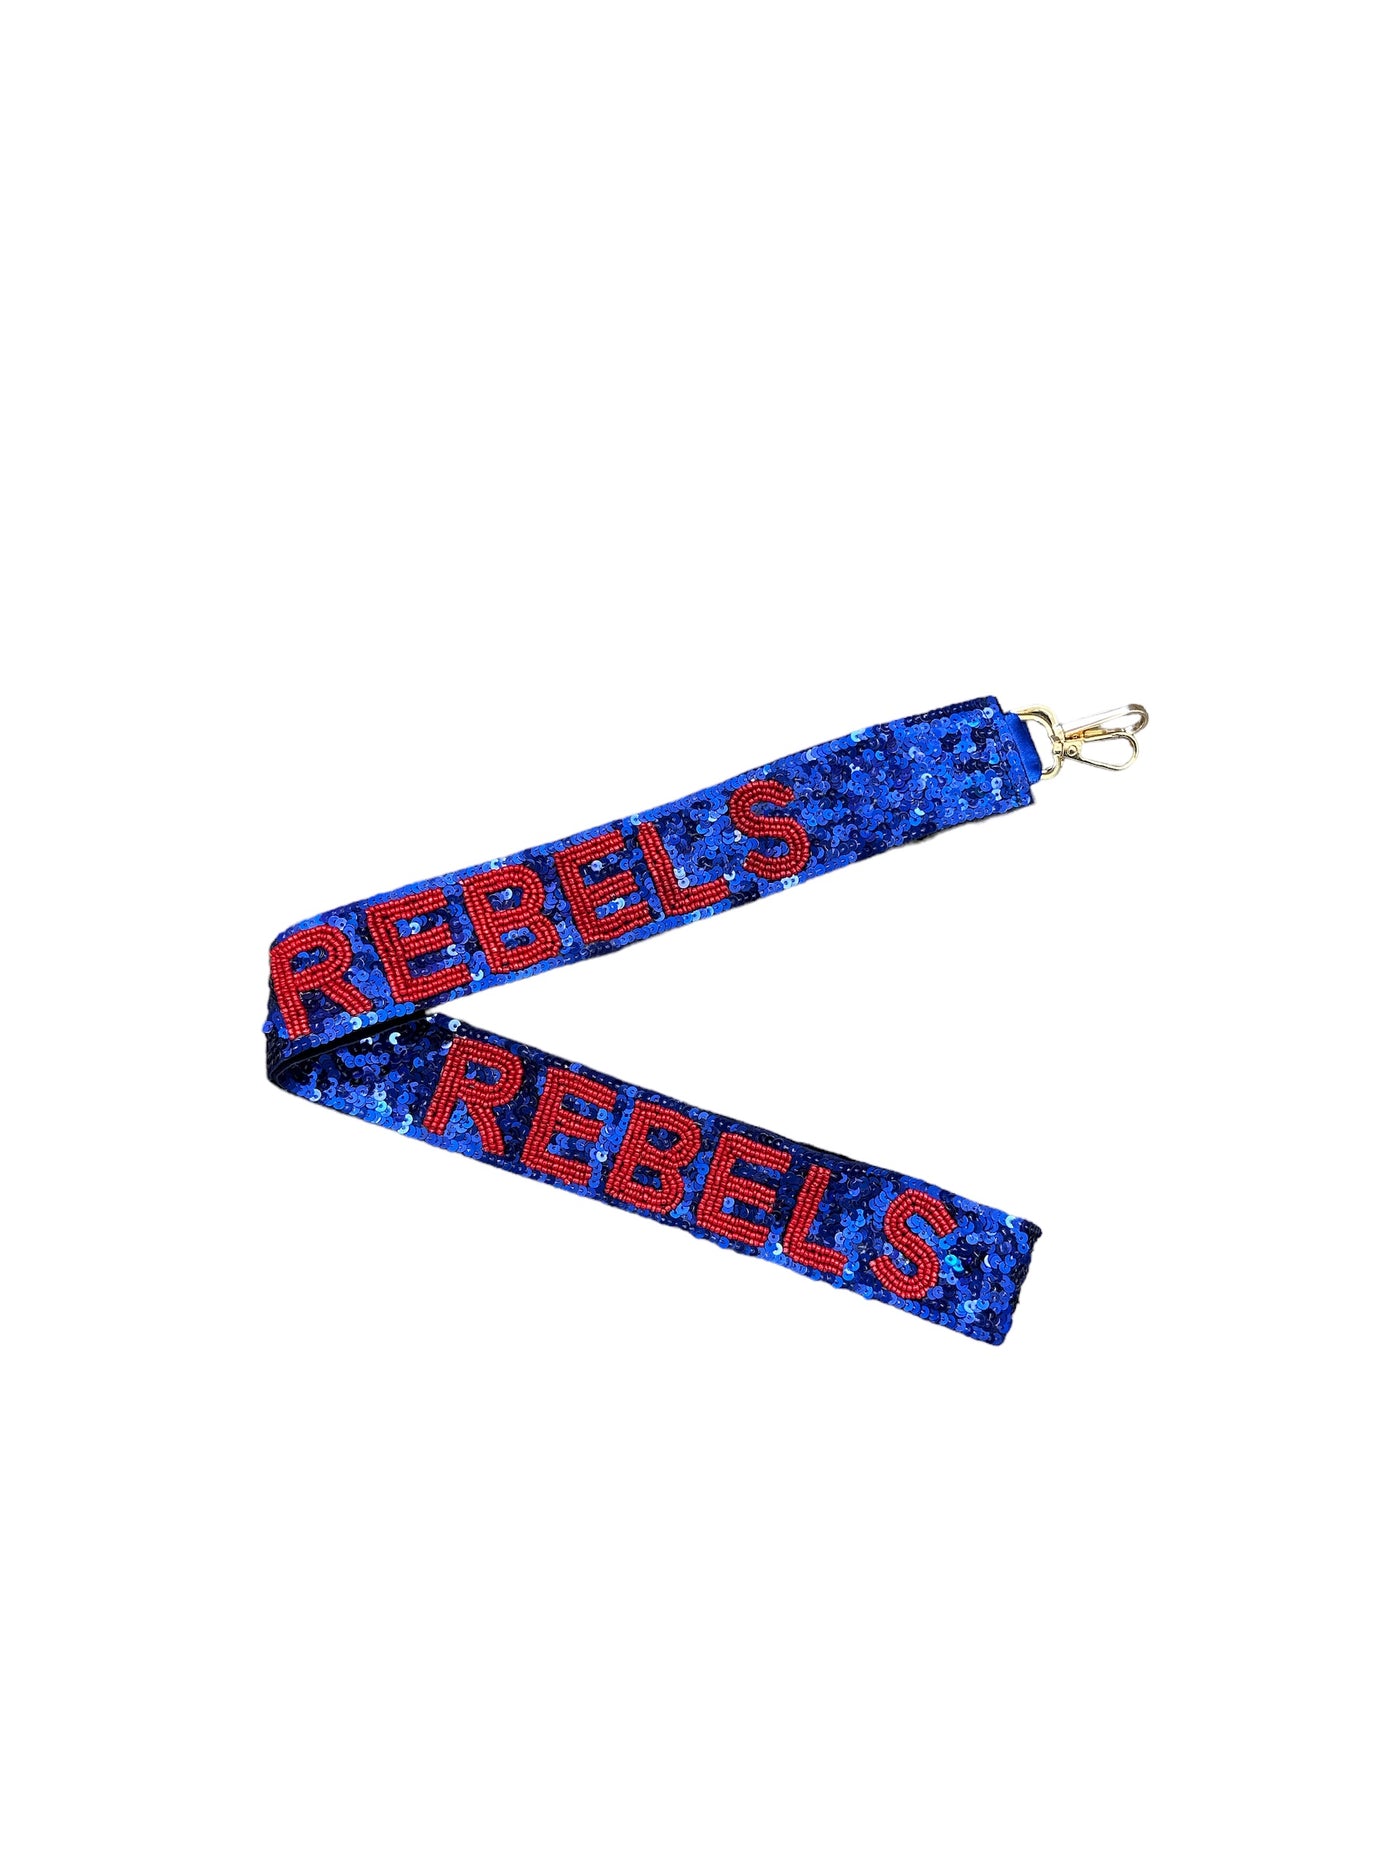 Sequin Bead Bag Strap - Rebs (Blue and Red)